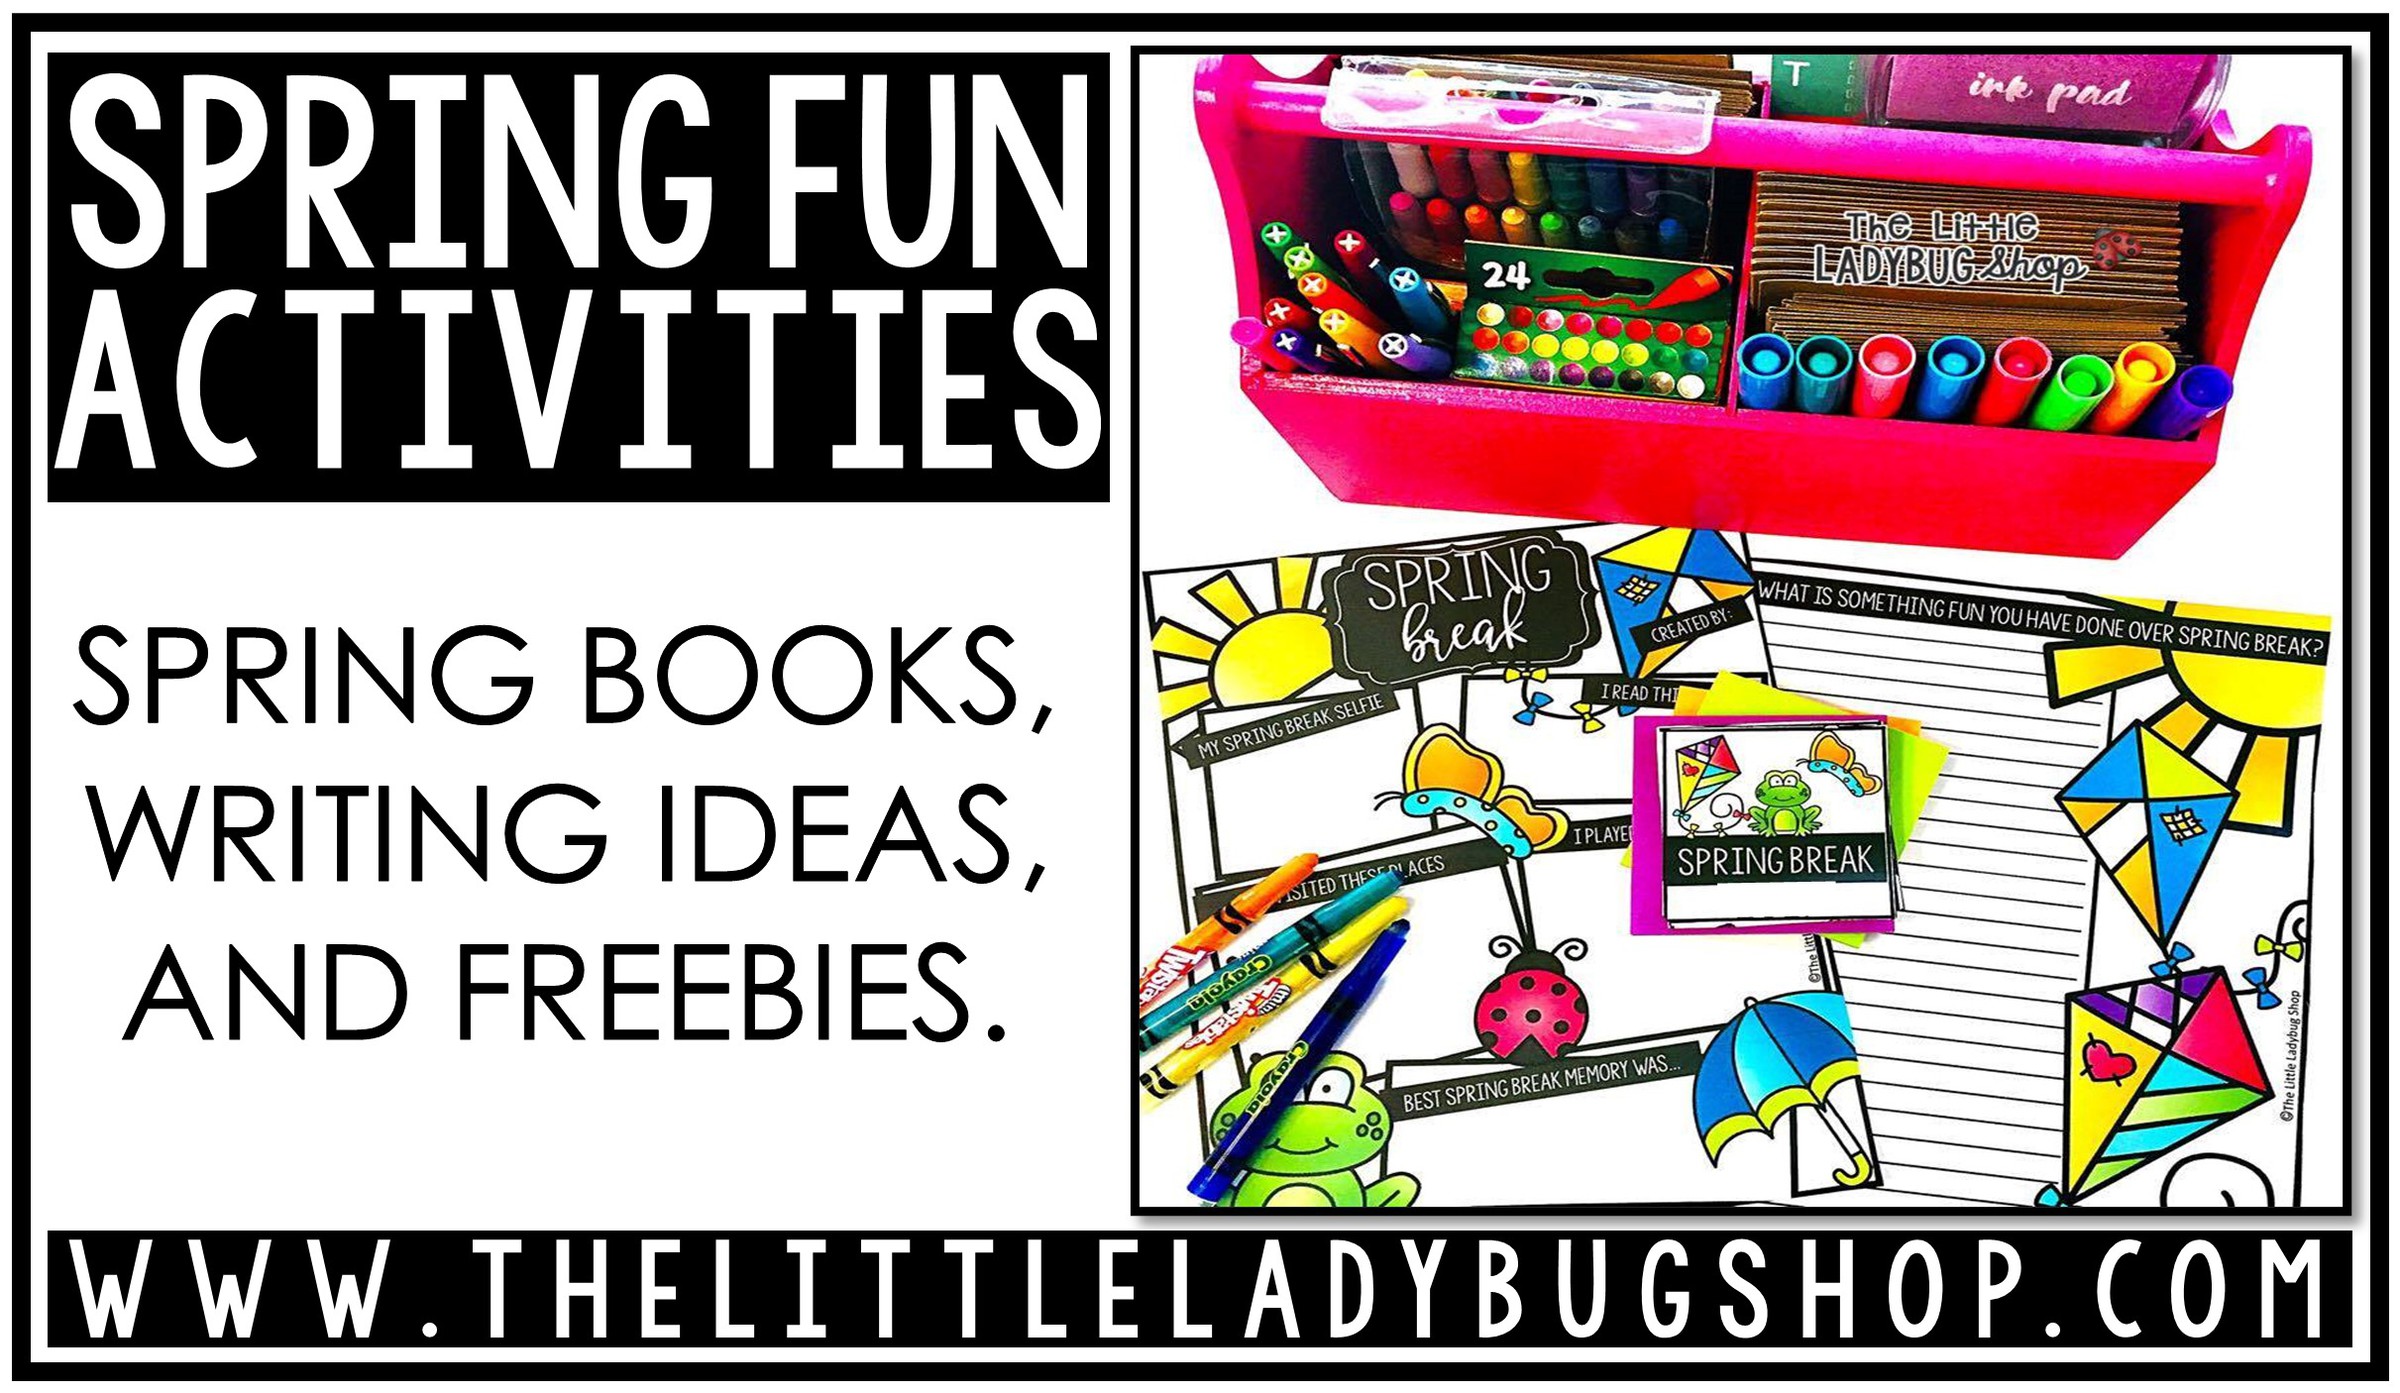 Spring activities, books and freebie